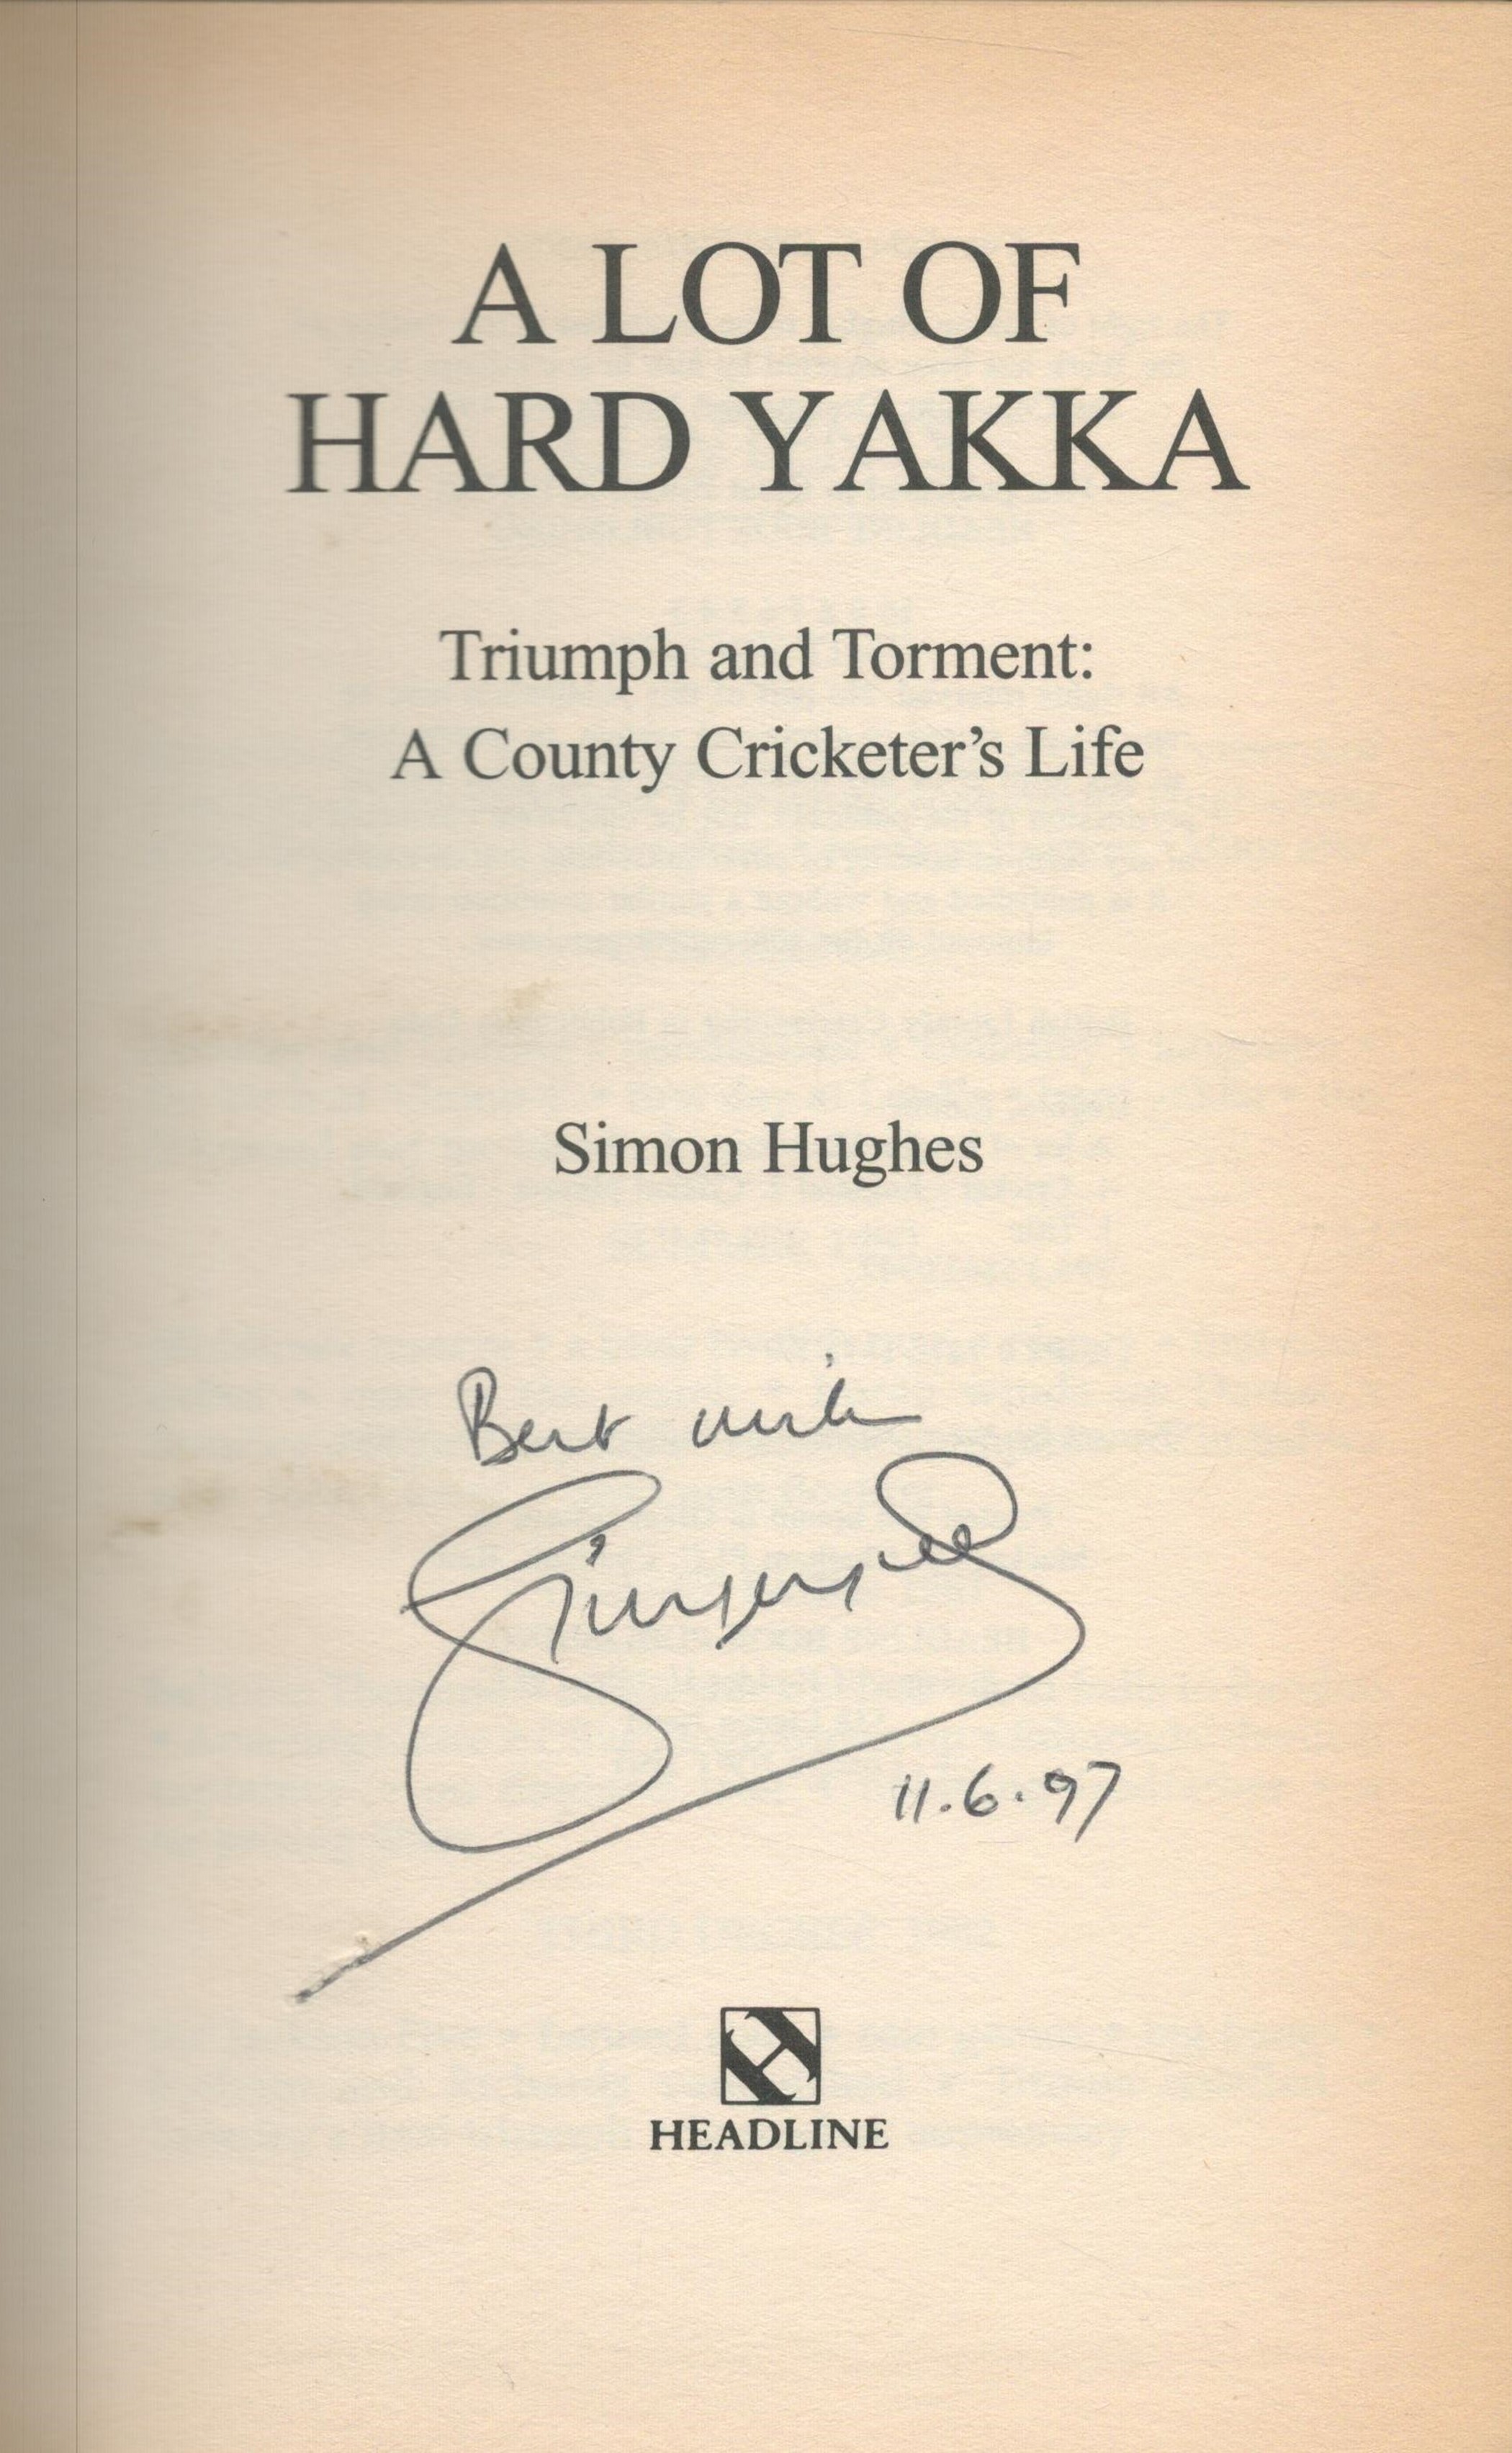 Simon Hughes signed A lot of Hard Yakka - triumph and torment: a county cricketer's life hardback - Image 2 of 3